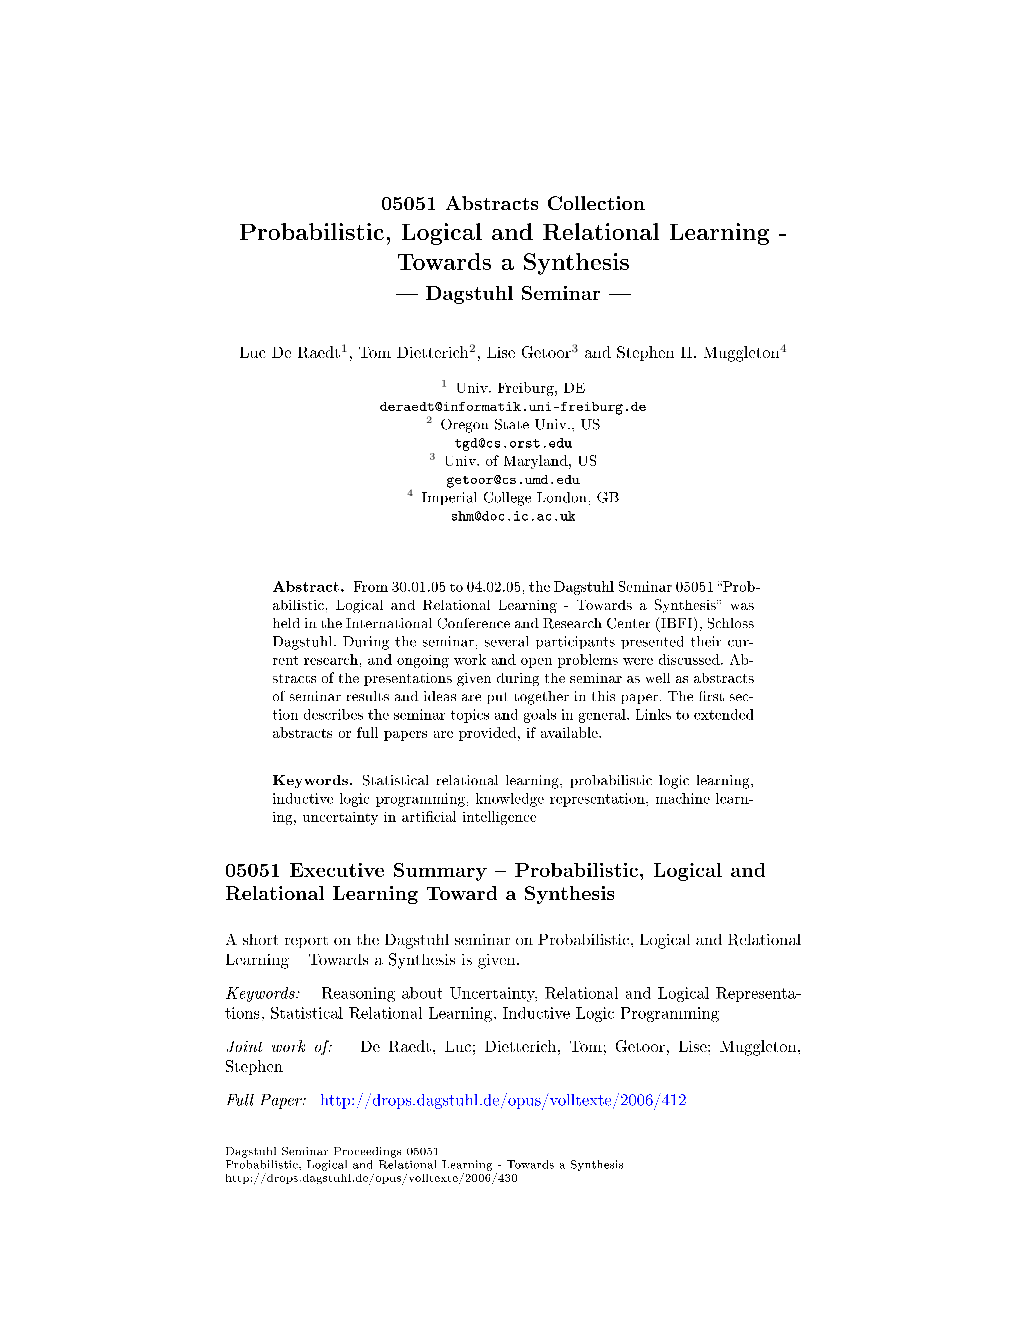 Probabilistic, Logical and Relational Learning - Towards a Synthesis  Dagstuhl Seminar 